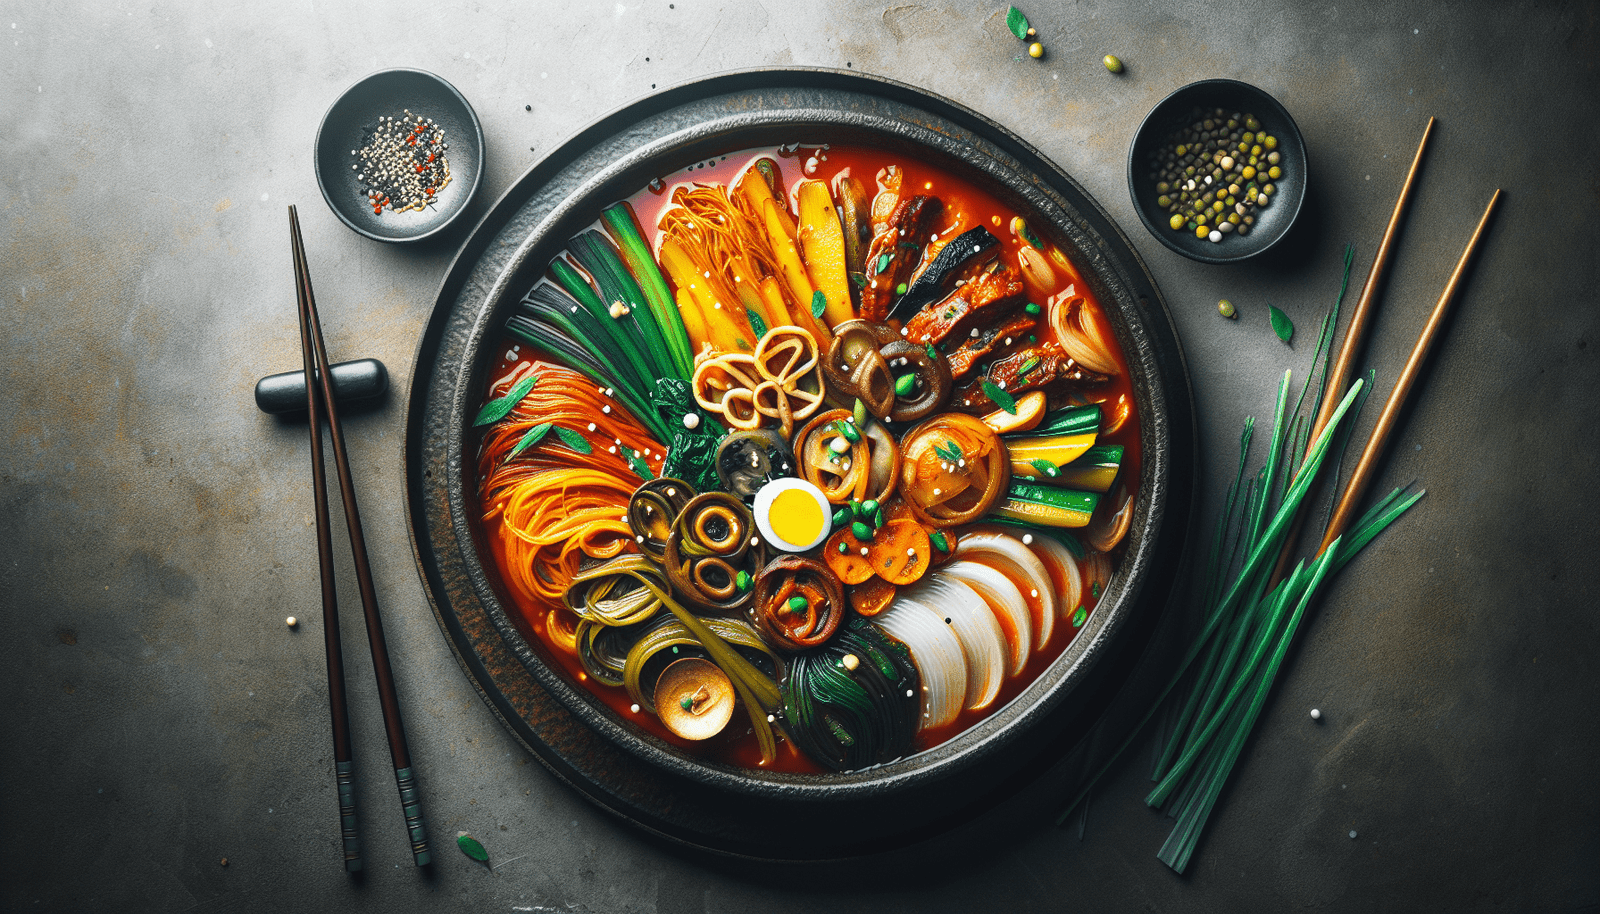 Can You Share Insights Into The Rise Of Modern Takes On Traditional Korean Stews?